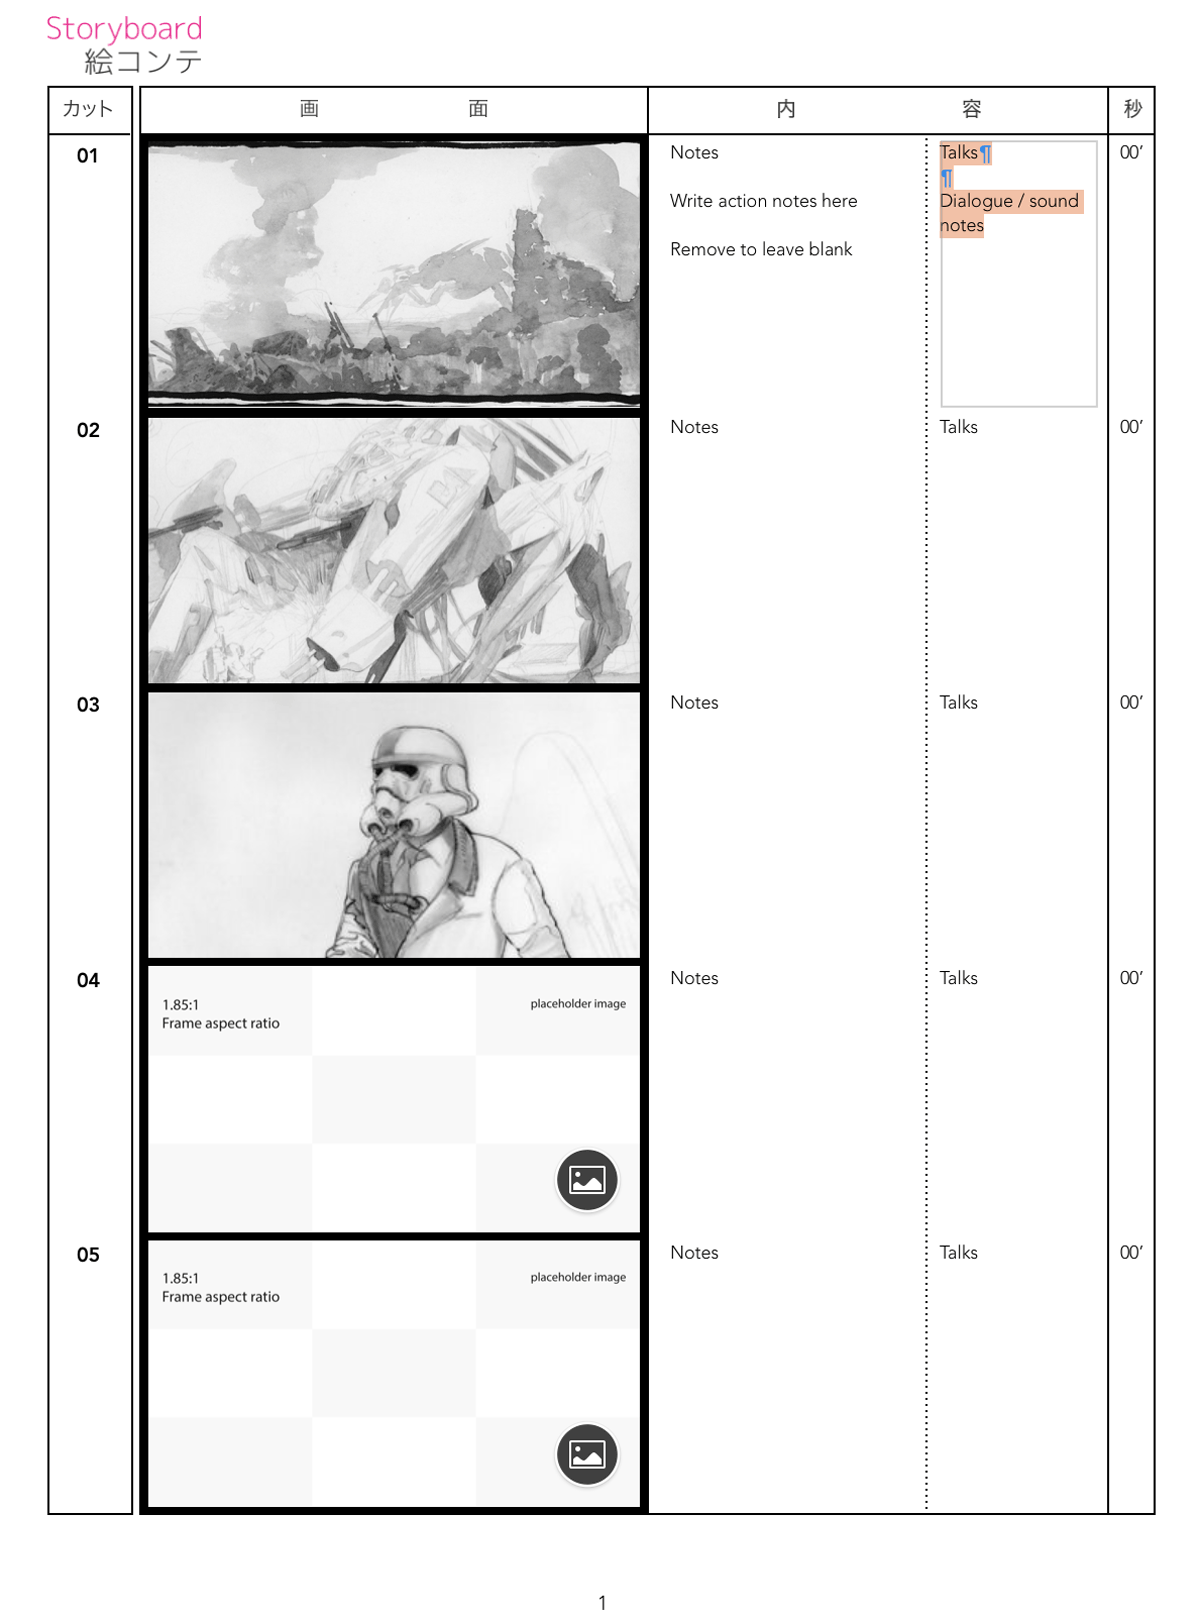 Apple Pages Anime Storyboard Template for 2.00:1 aspect ratio on DIN A4  vertical | Storyboard template, Anime, Storyboard